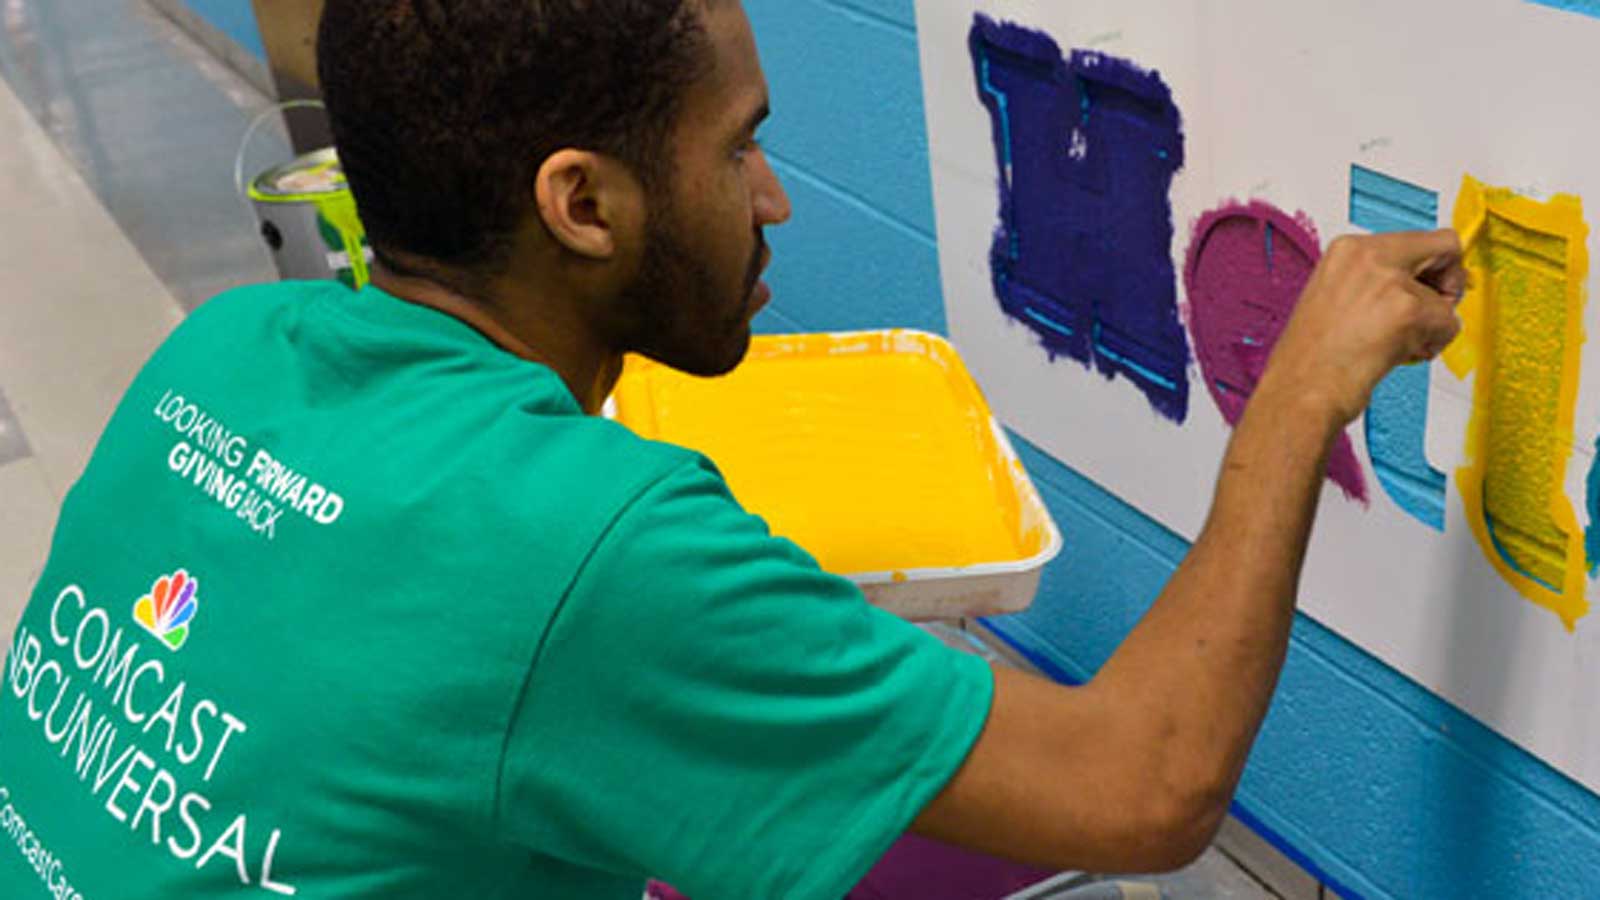 Comcast Cares Day volunteer painting mural